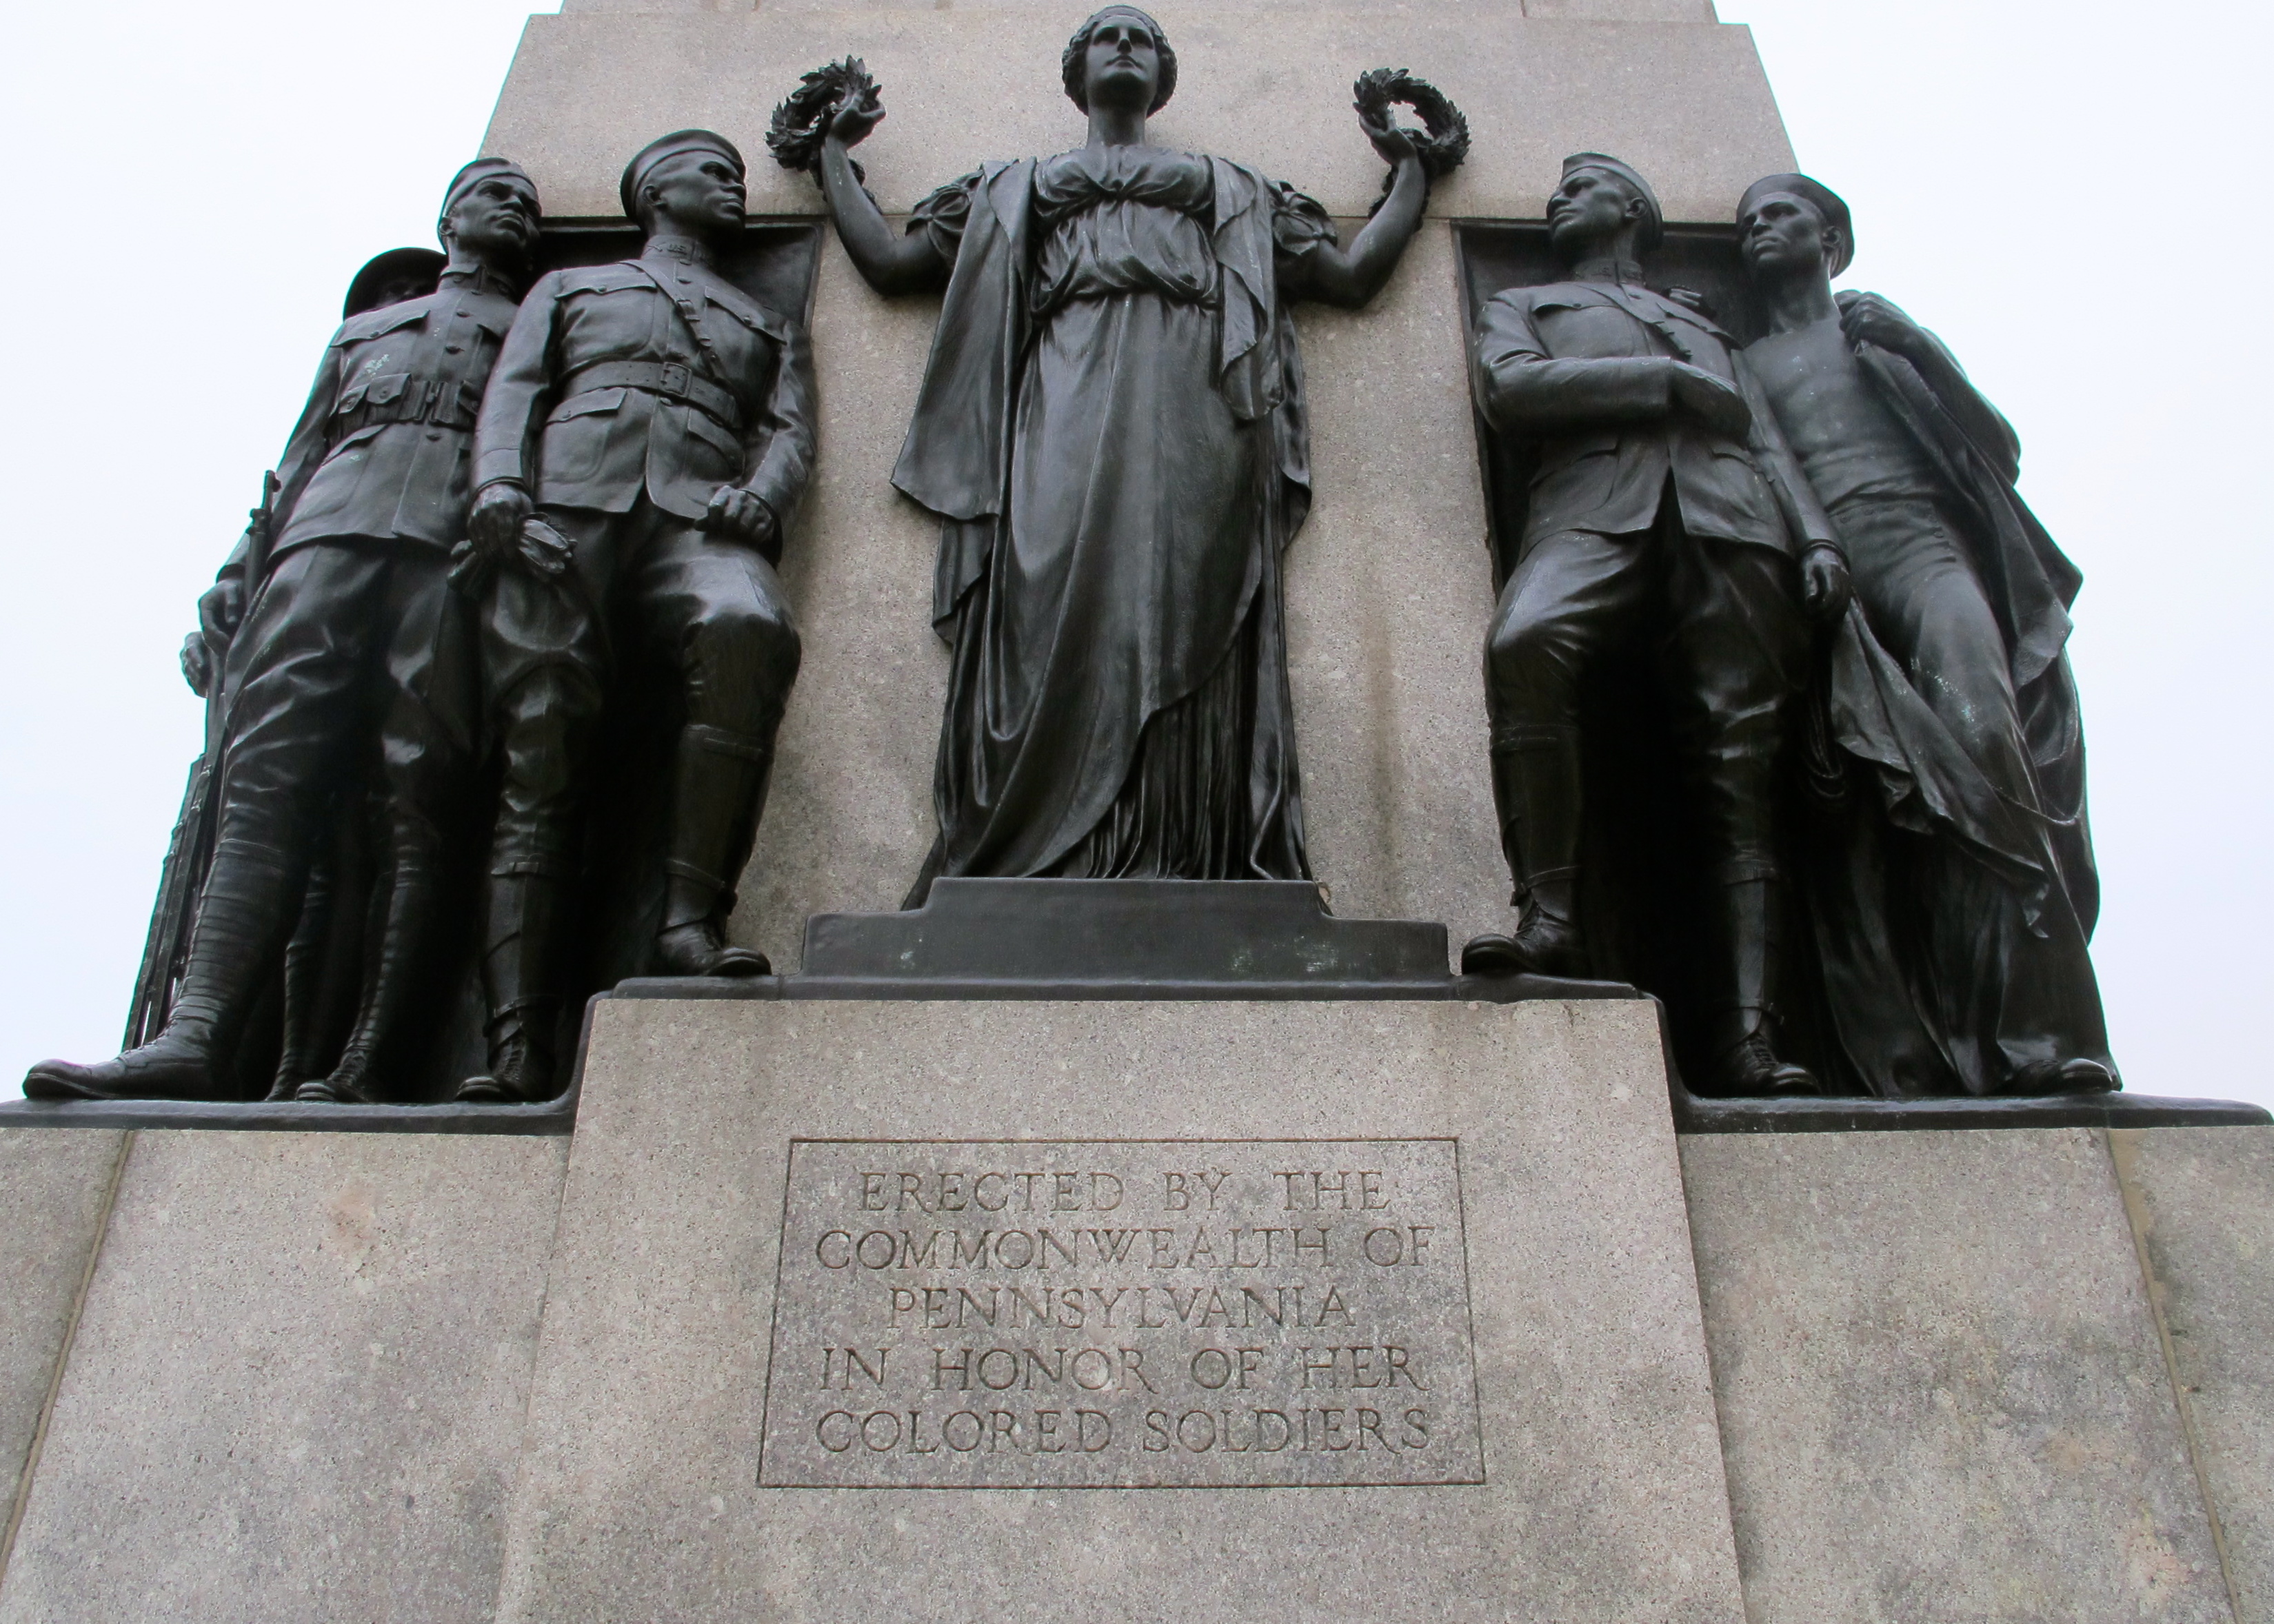 All Wars Memorial to Colored Soldiers and Sailors, 1934